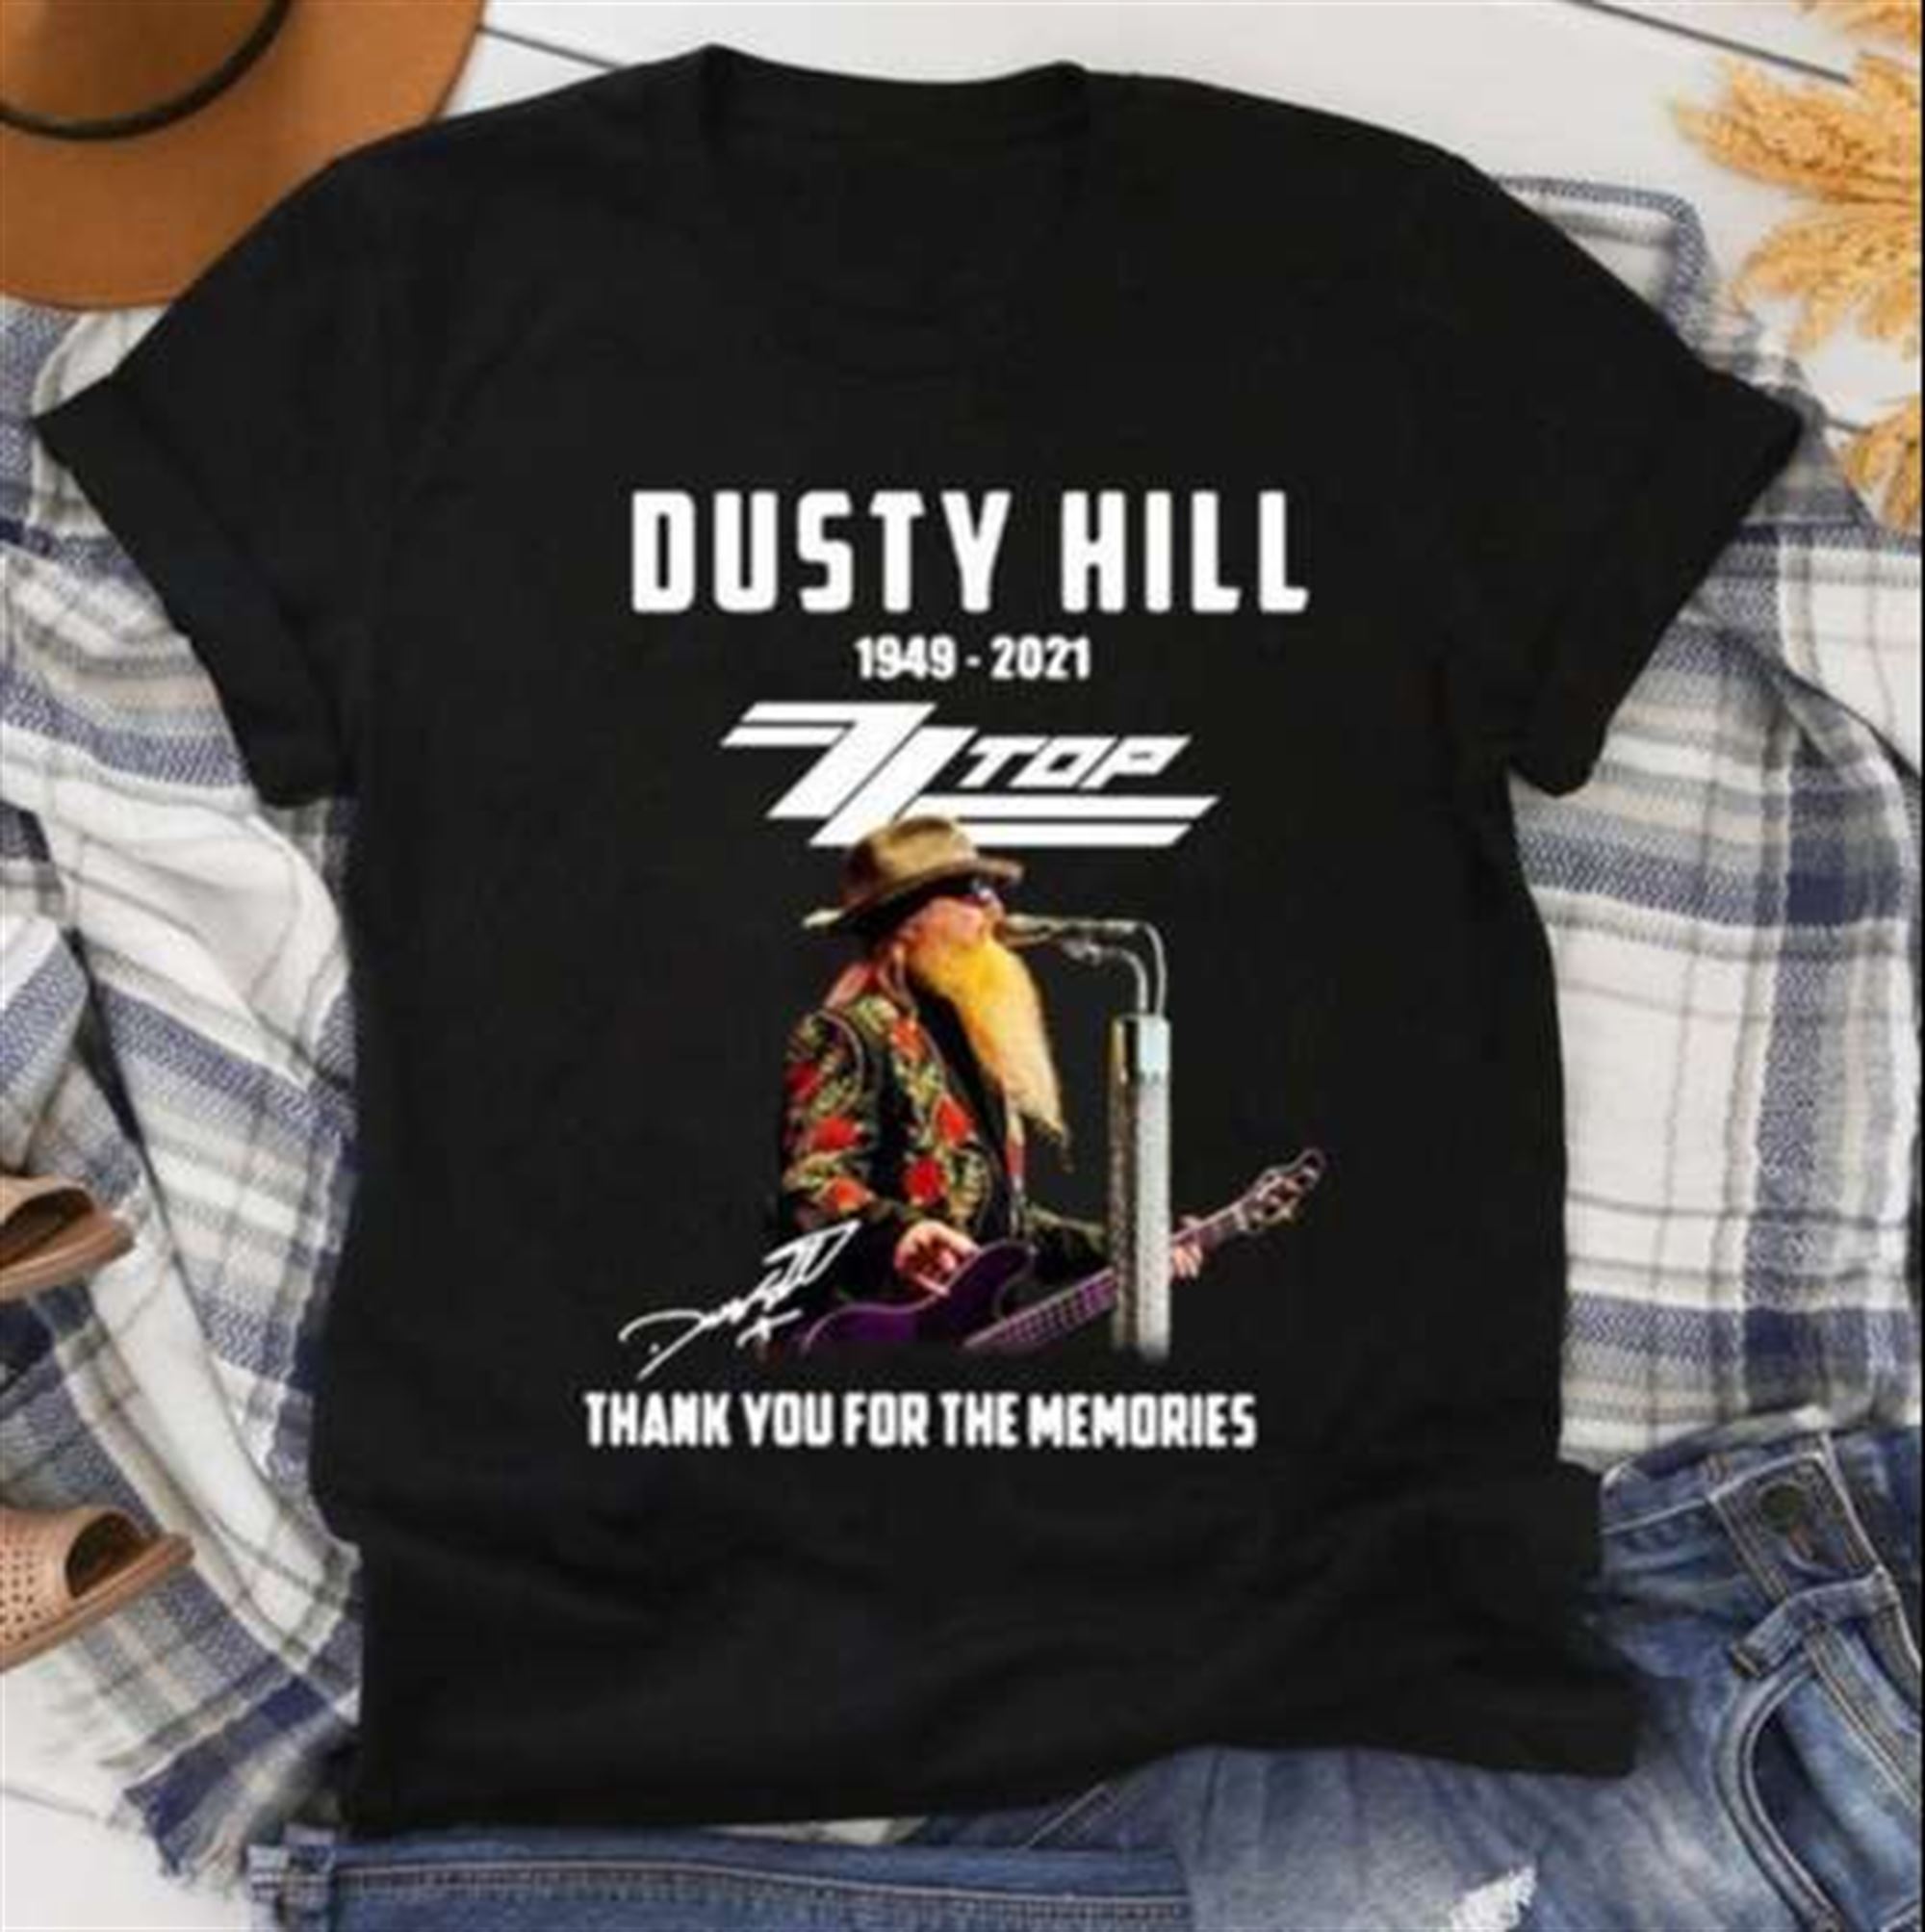 Dusty Hill Zztop 1949-2021 Thank You For The Memories T Shirt Full Size Up To 5xl